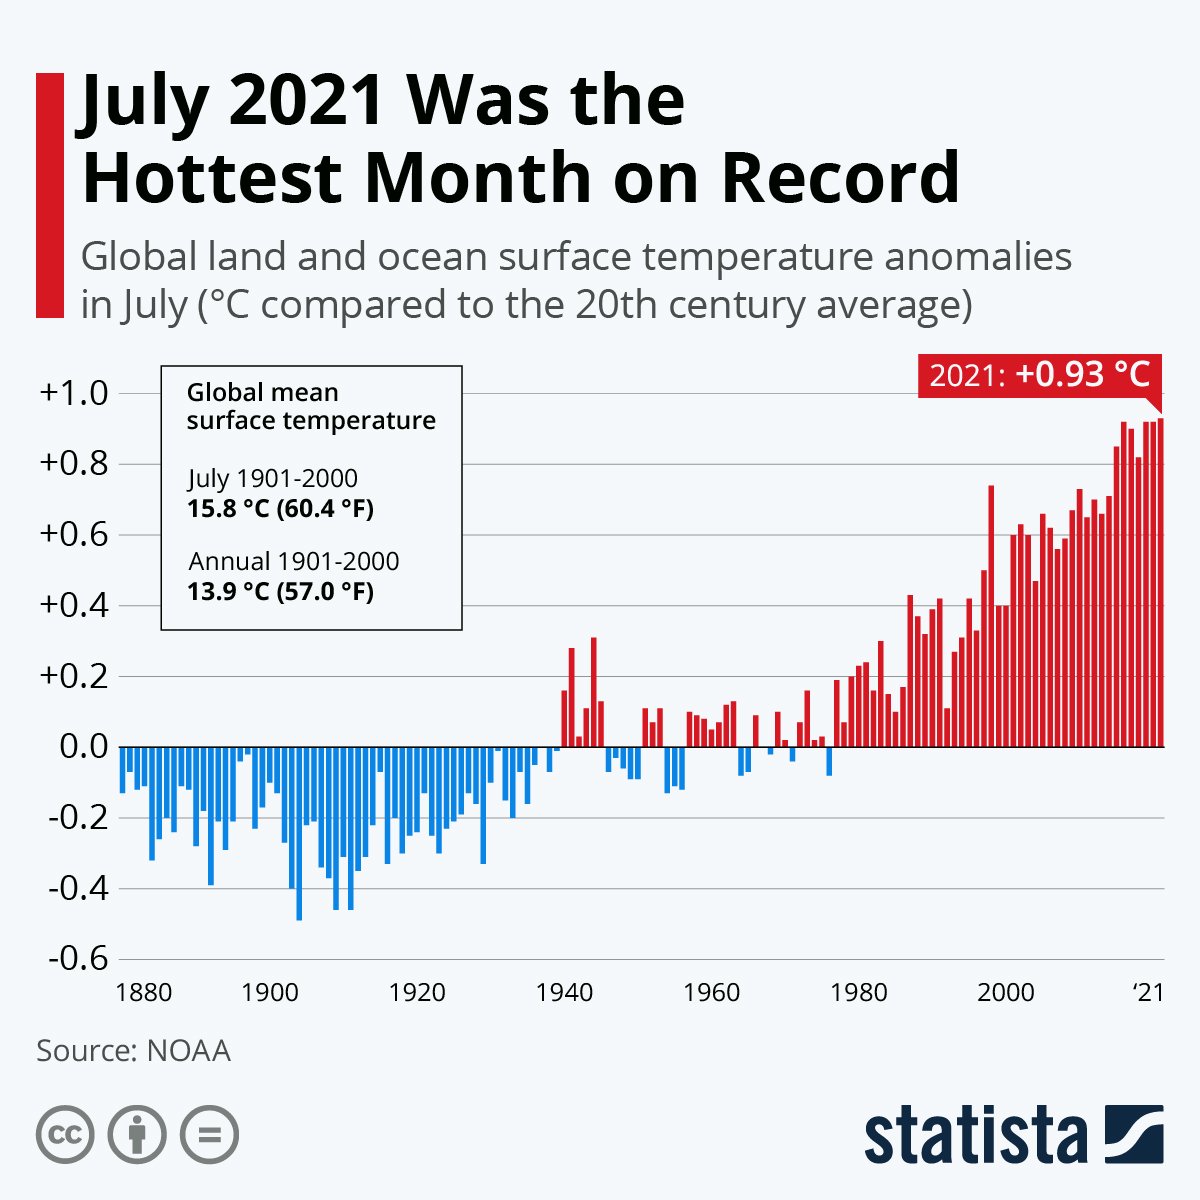 July 2021 Was the Hottest Month on Record